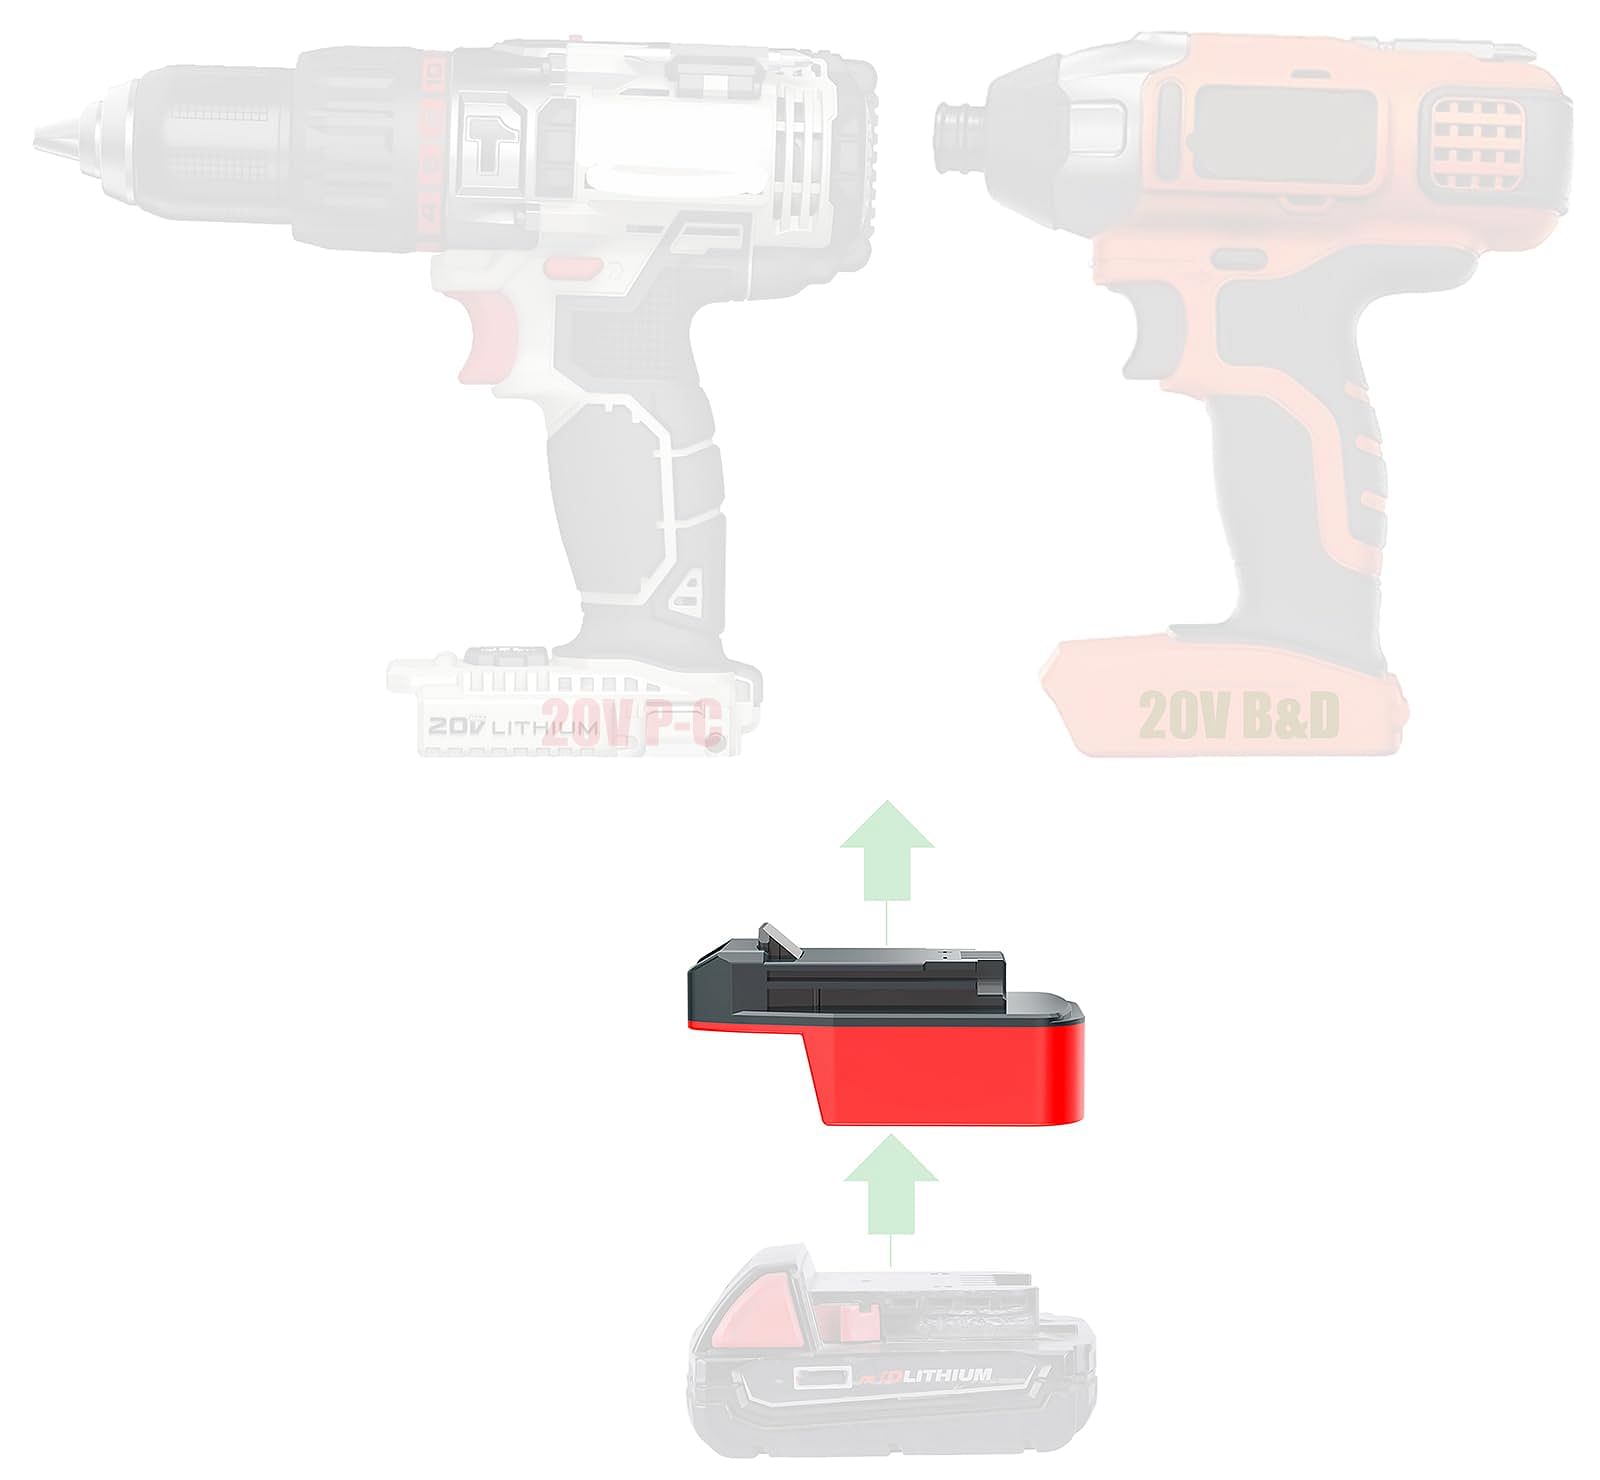 Diagram illustrating the connection points between a Milwaukee power tool and a Ryobi battery